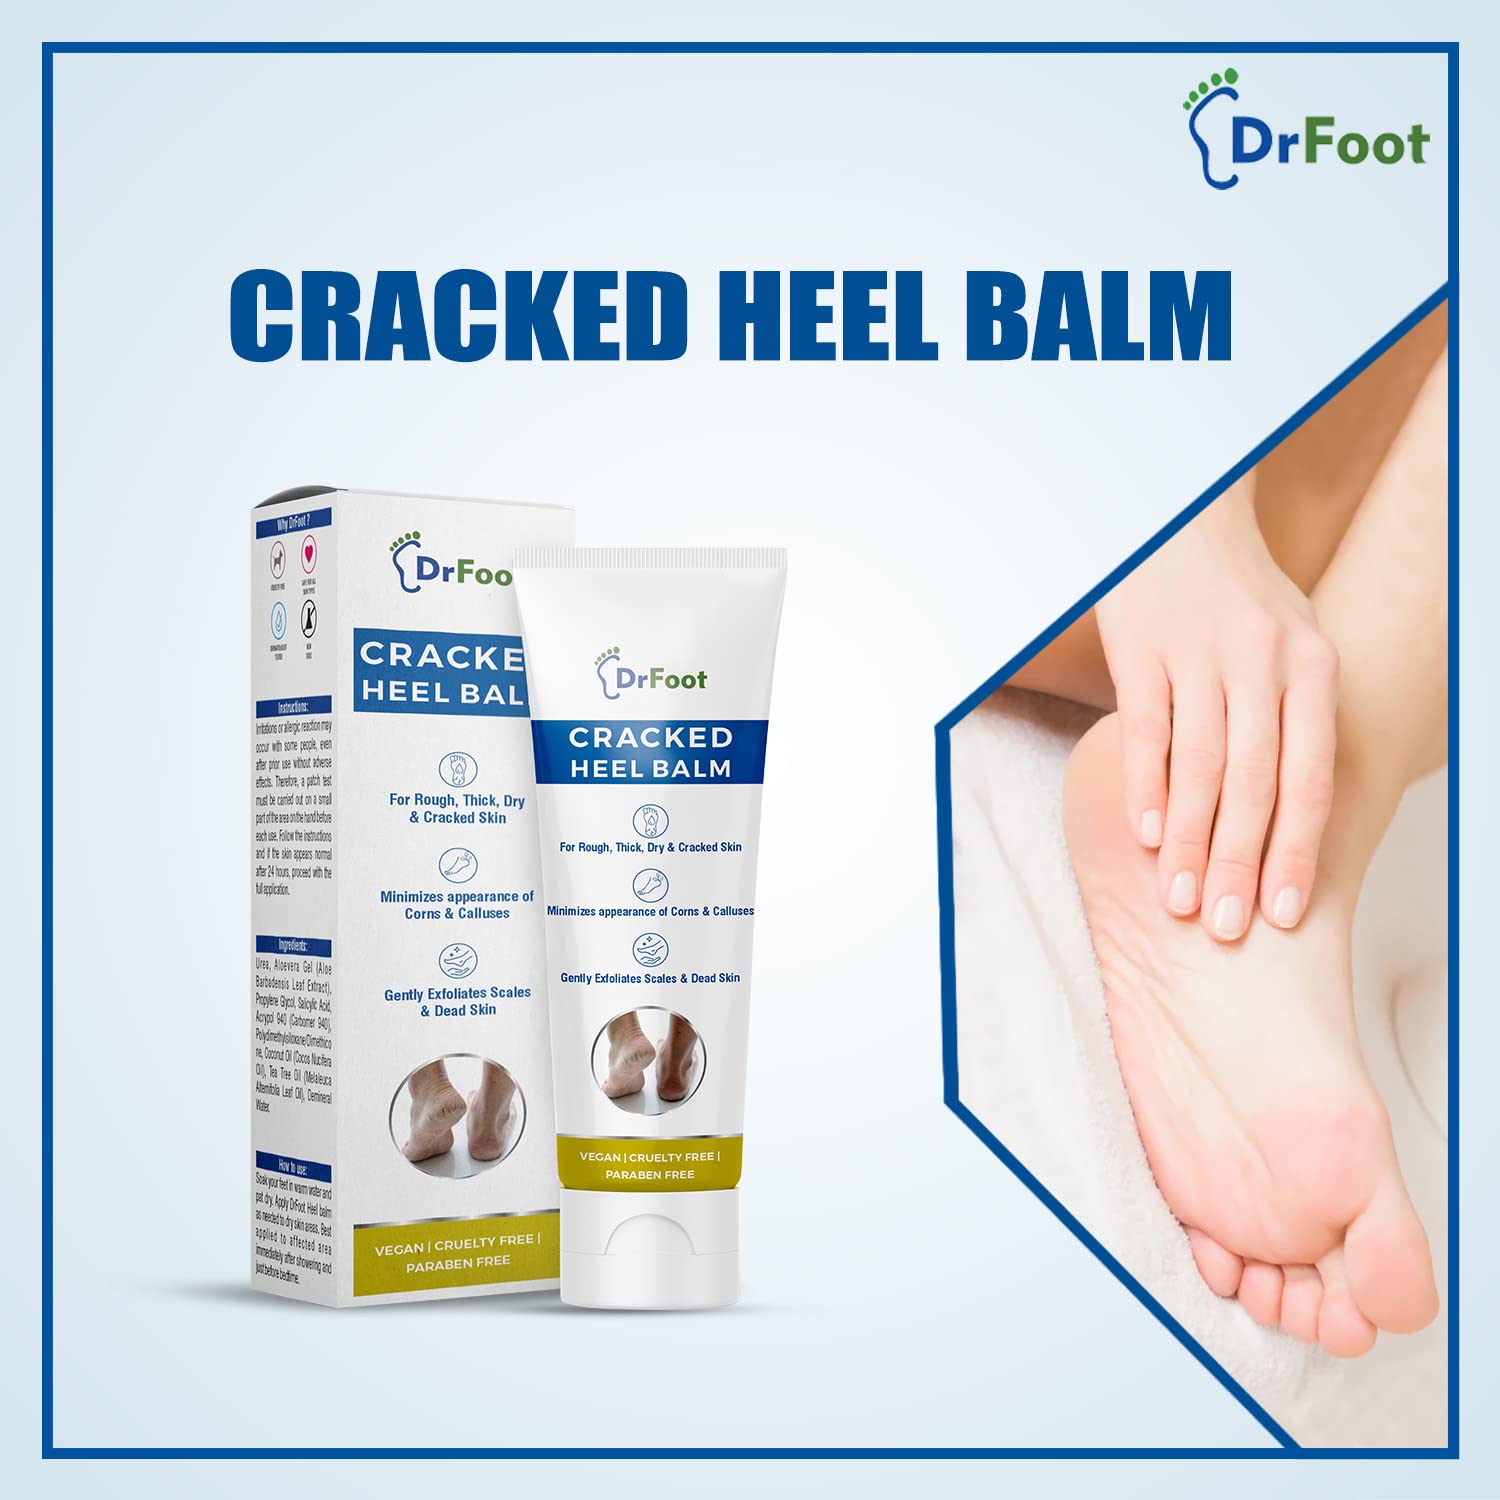 Dr Foot Cracked Heel Balm with Urea, Aloe Vera Gel & Tea Tree Oil for Rough, Thick, Dry, Cracked Skin | Cure and Moisturizes for Healthy Feet – 50gm (Pack of 5)